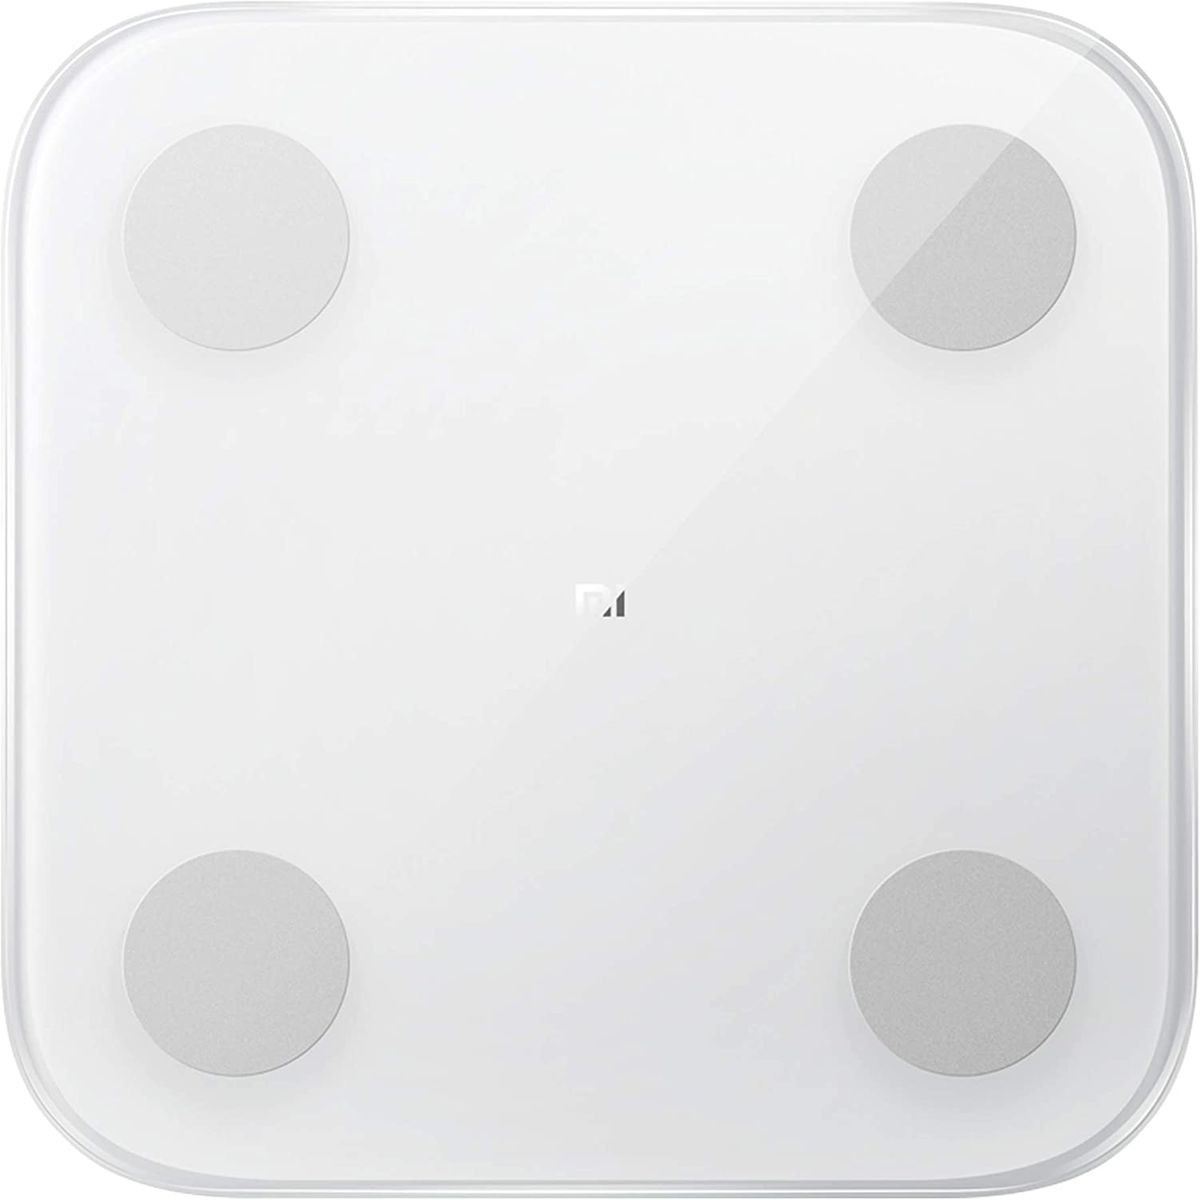 Xiaomi Mi Smart Scale 2 personal scale (measurement of e.g. weight,Body Mass Index (BMI), Mi Fit app connection for iOS/Android, up to 16 person profiles, max. 150kg) Mi Body Composition Scale 2